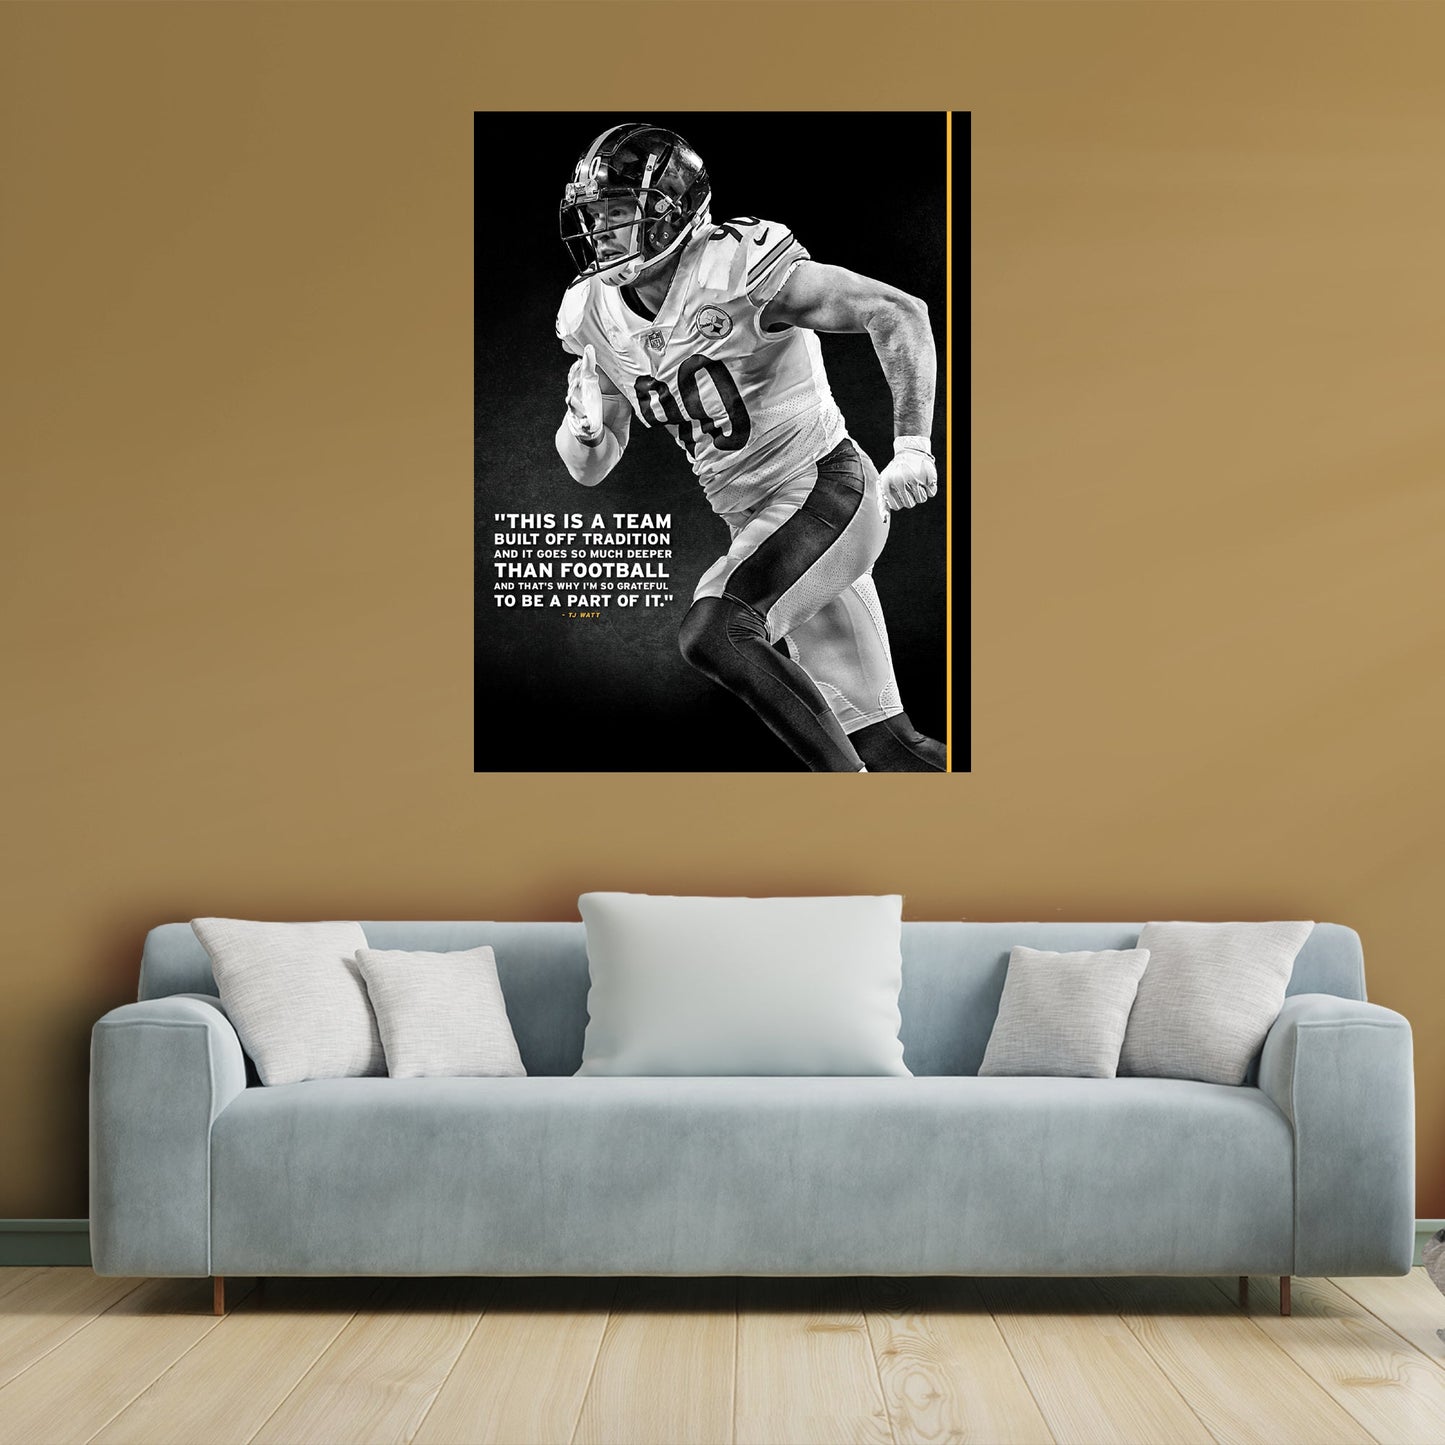 Pittsburgh Steelers: T.J. Watt Inspirational Poster - Officially Licensed NFL Removable Adhesive Decal